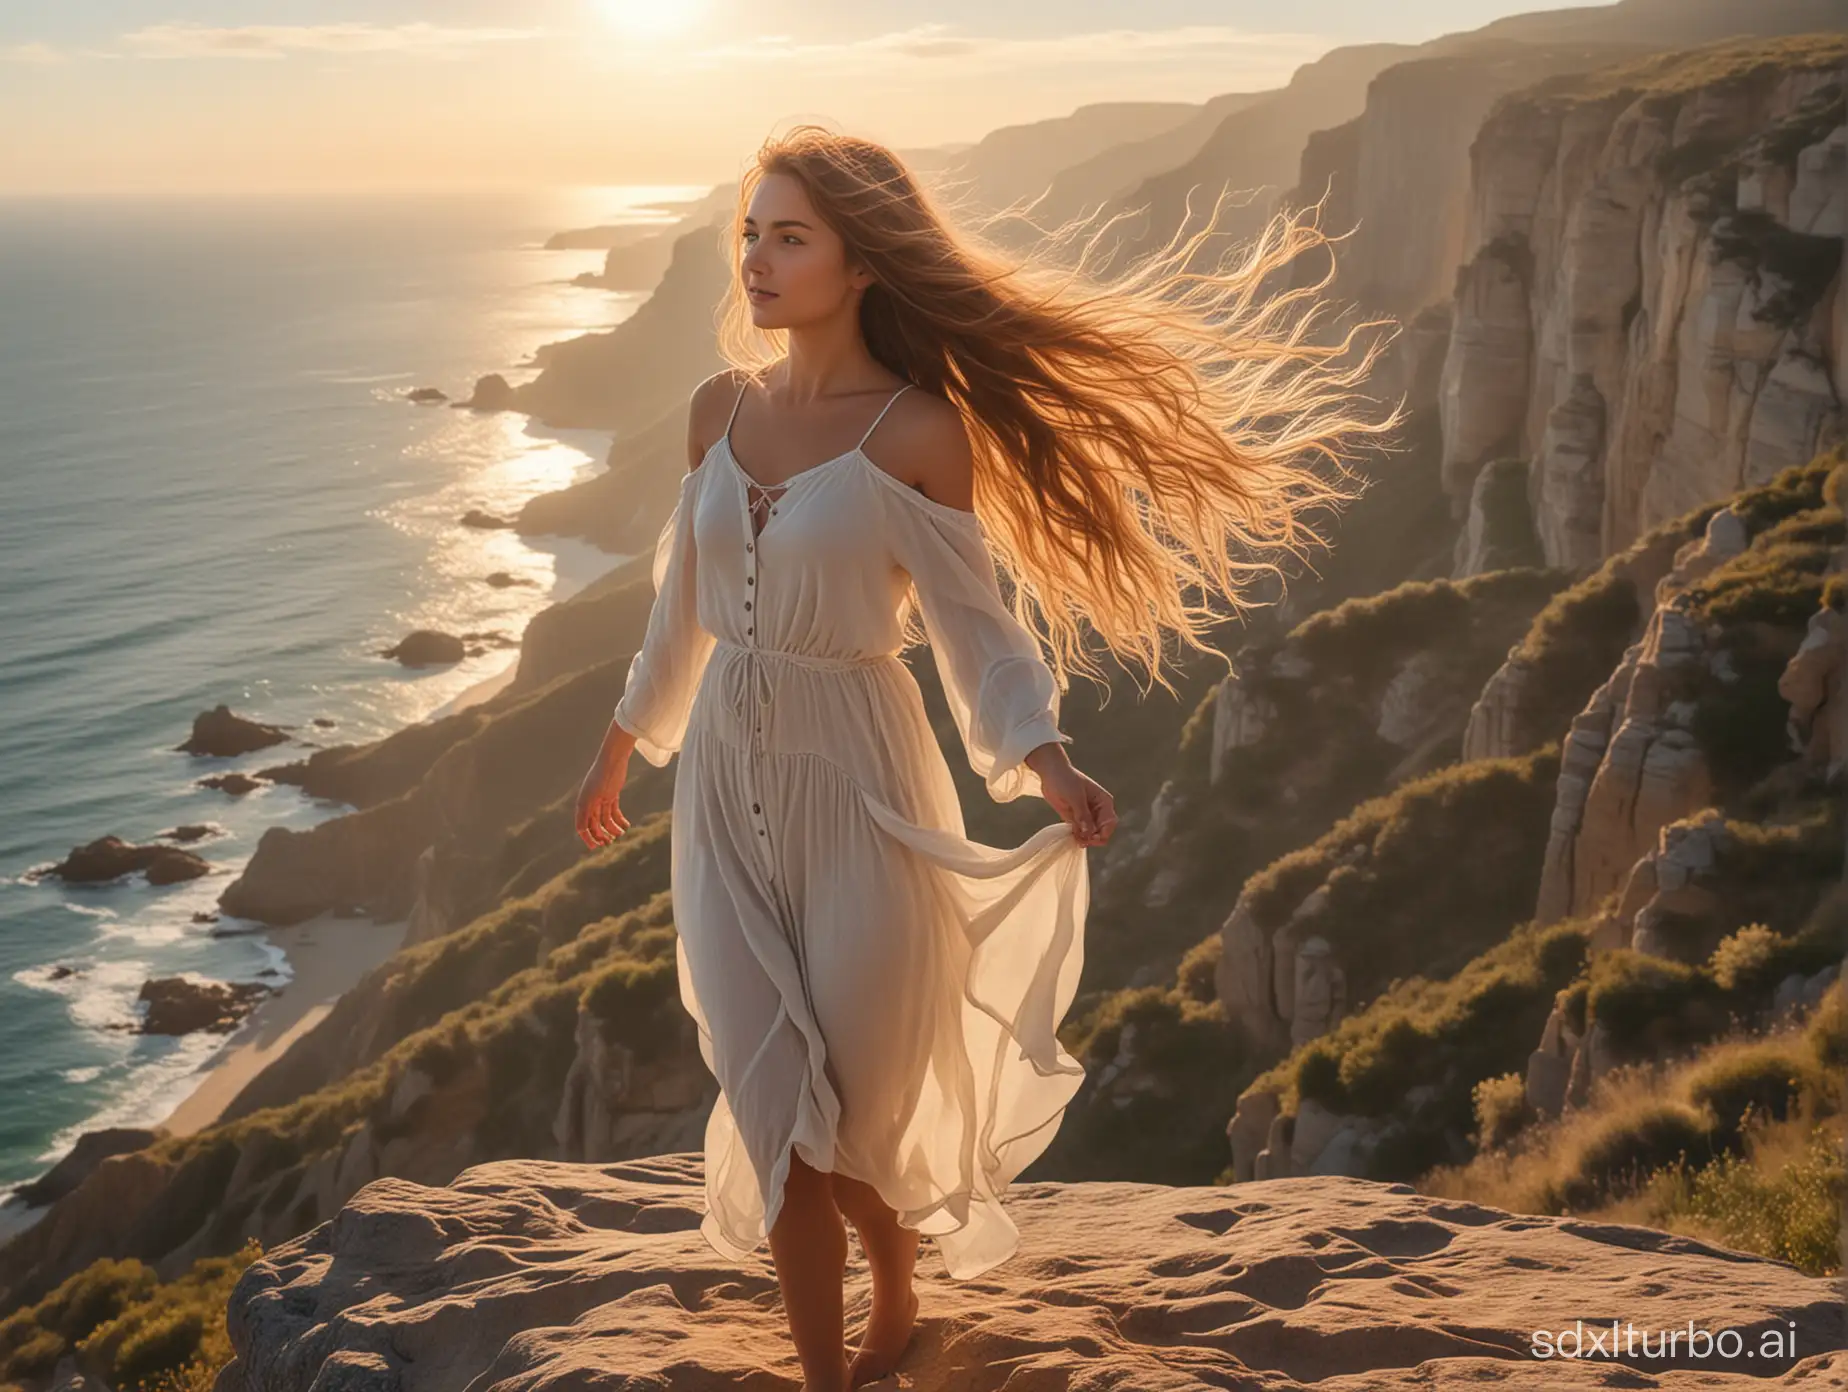 Young-Woman-Standing-on-Cliff-Overlooking-Serene-SunKissed-Landscape